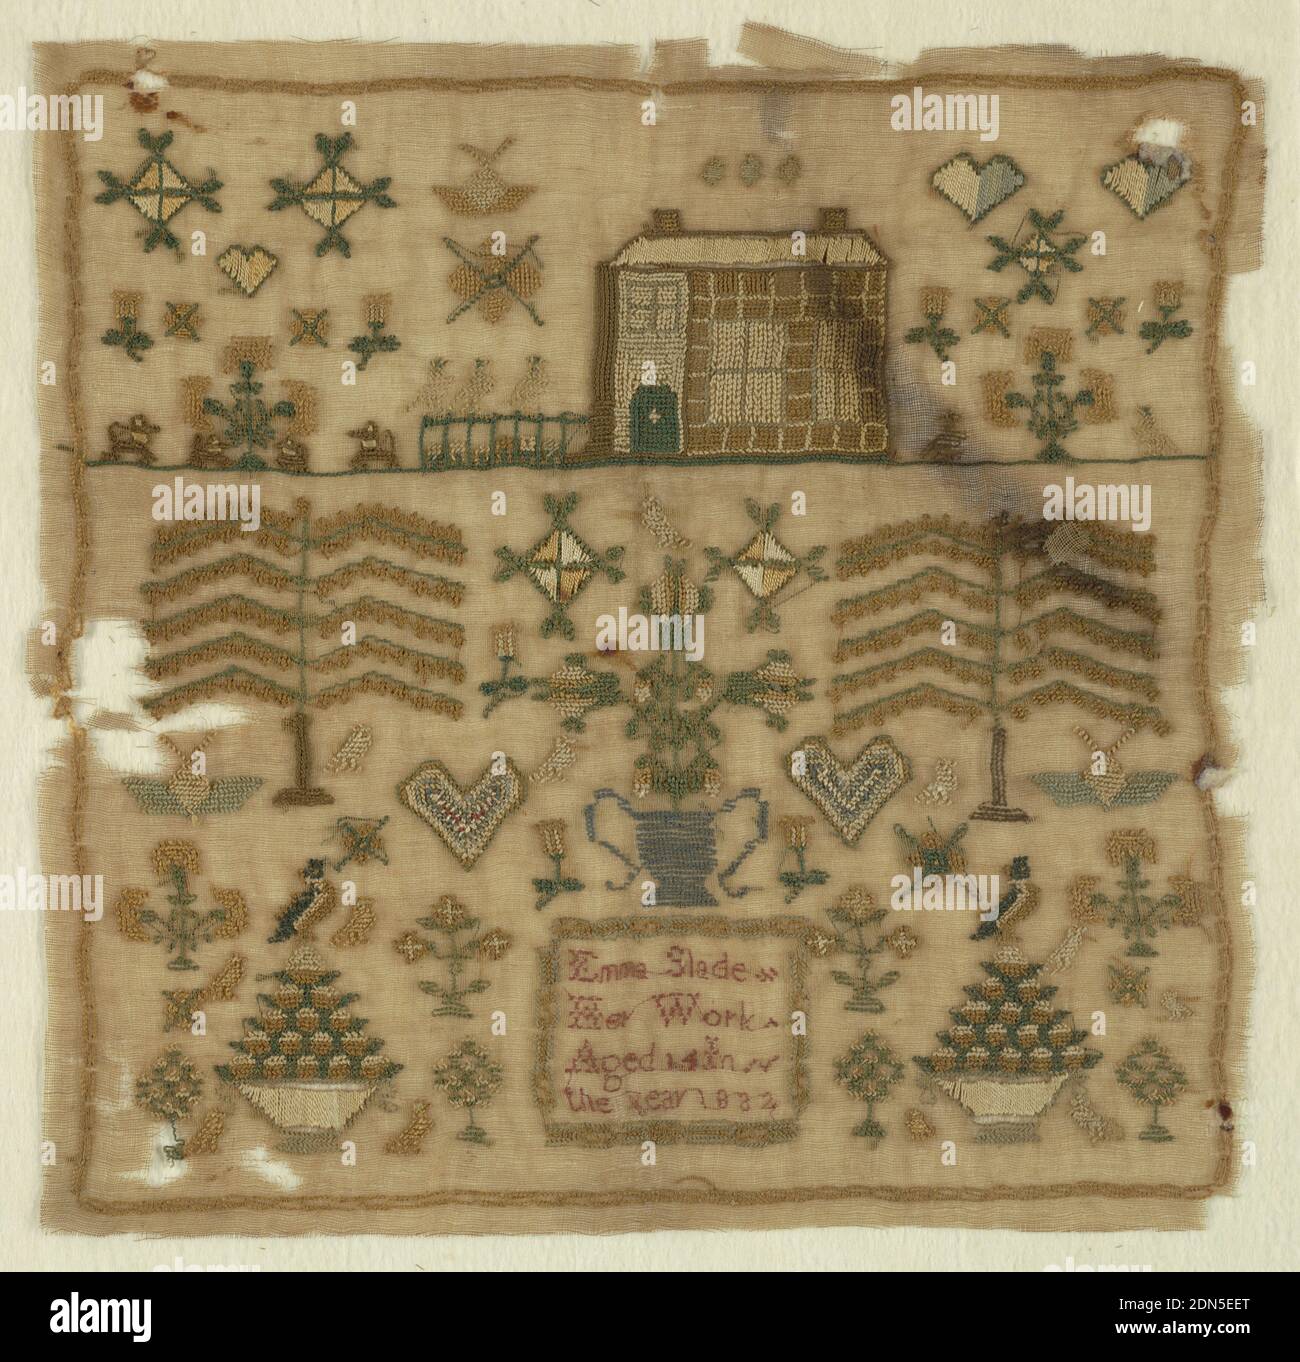 Sampler, Emma Slade, Medium: silk embroidery on linen Technique: cross, tent, and satin stitches on plain weave, At top, a house with trees, dogs, birds and motifs; below a vase of flowers with trees, birds, hearts surrounded by a chain border., England, 1832, embroidery & stitching, Sampler Stock Photo